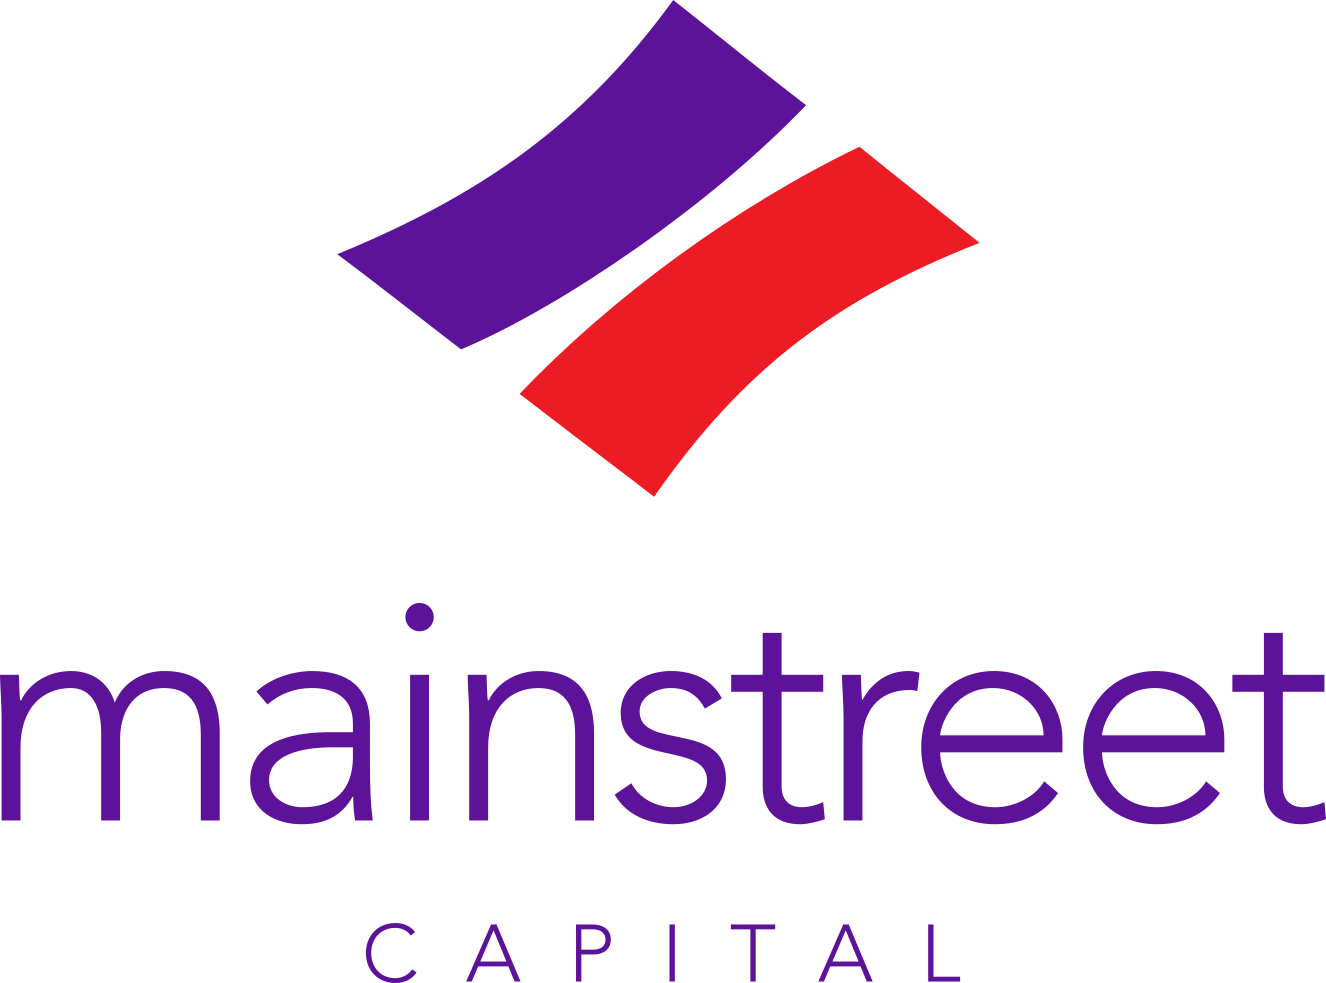 Mainstreet Capital relaunches its brand, promises new corporate philosophy